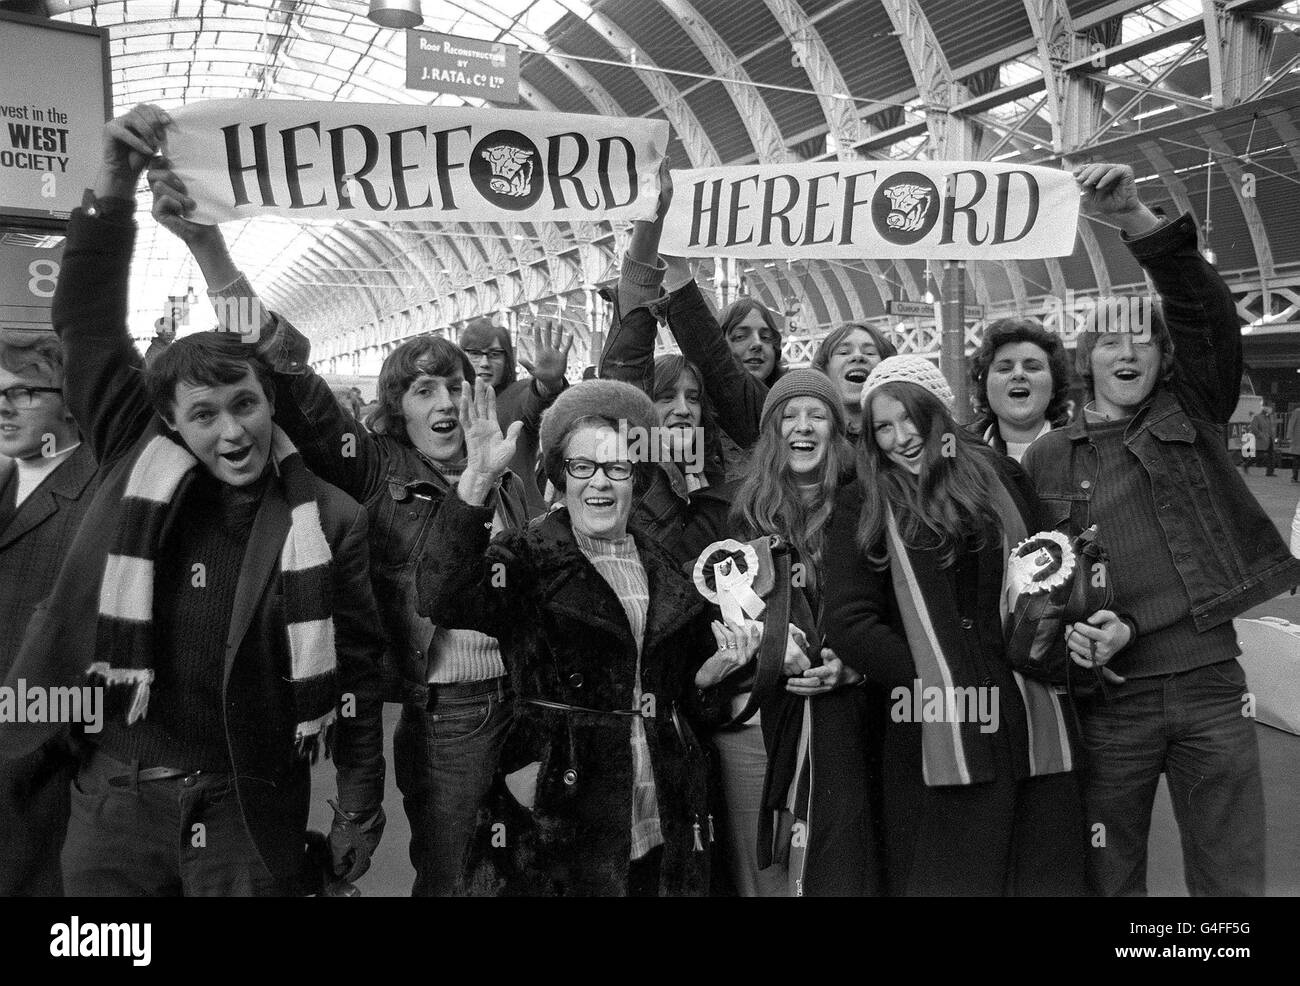 HEREFORD SUPPORTERS: 1972. PA NEWS PHOTO 14/2/72 HEREFORD F.C. SUPPORTERS Stock Photo